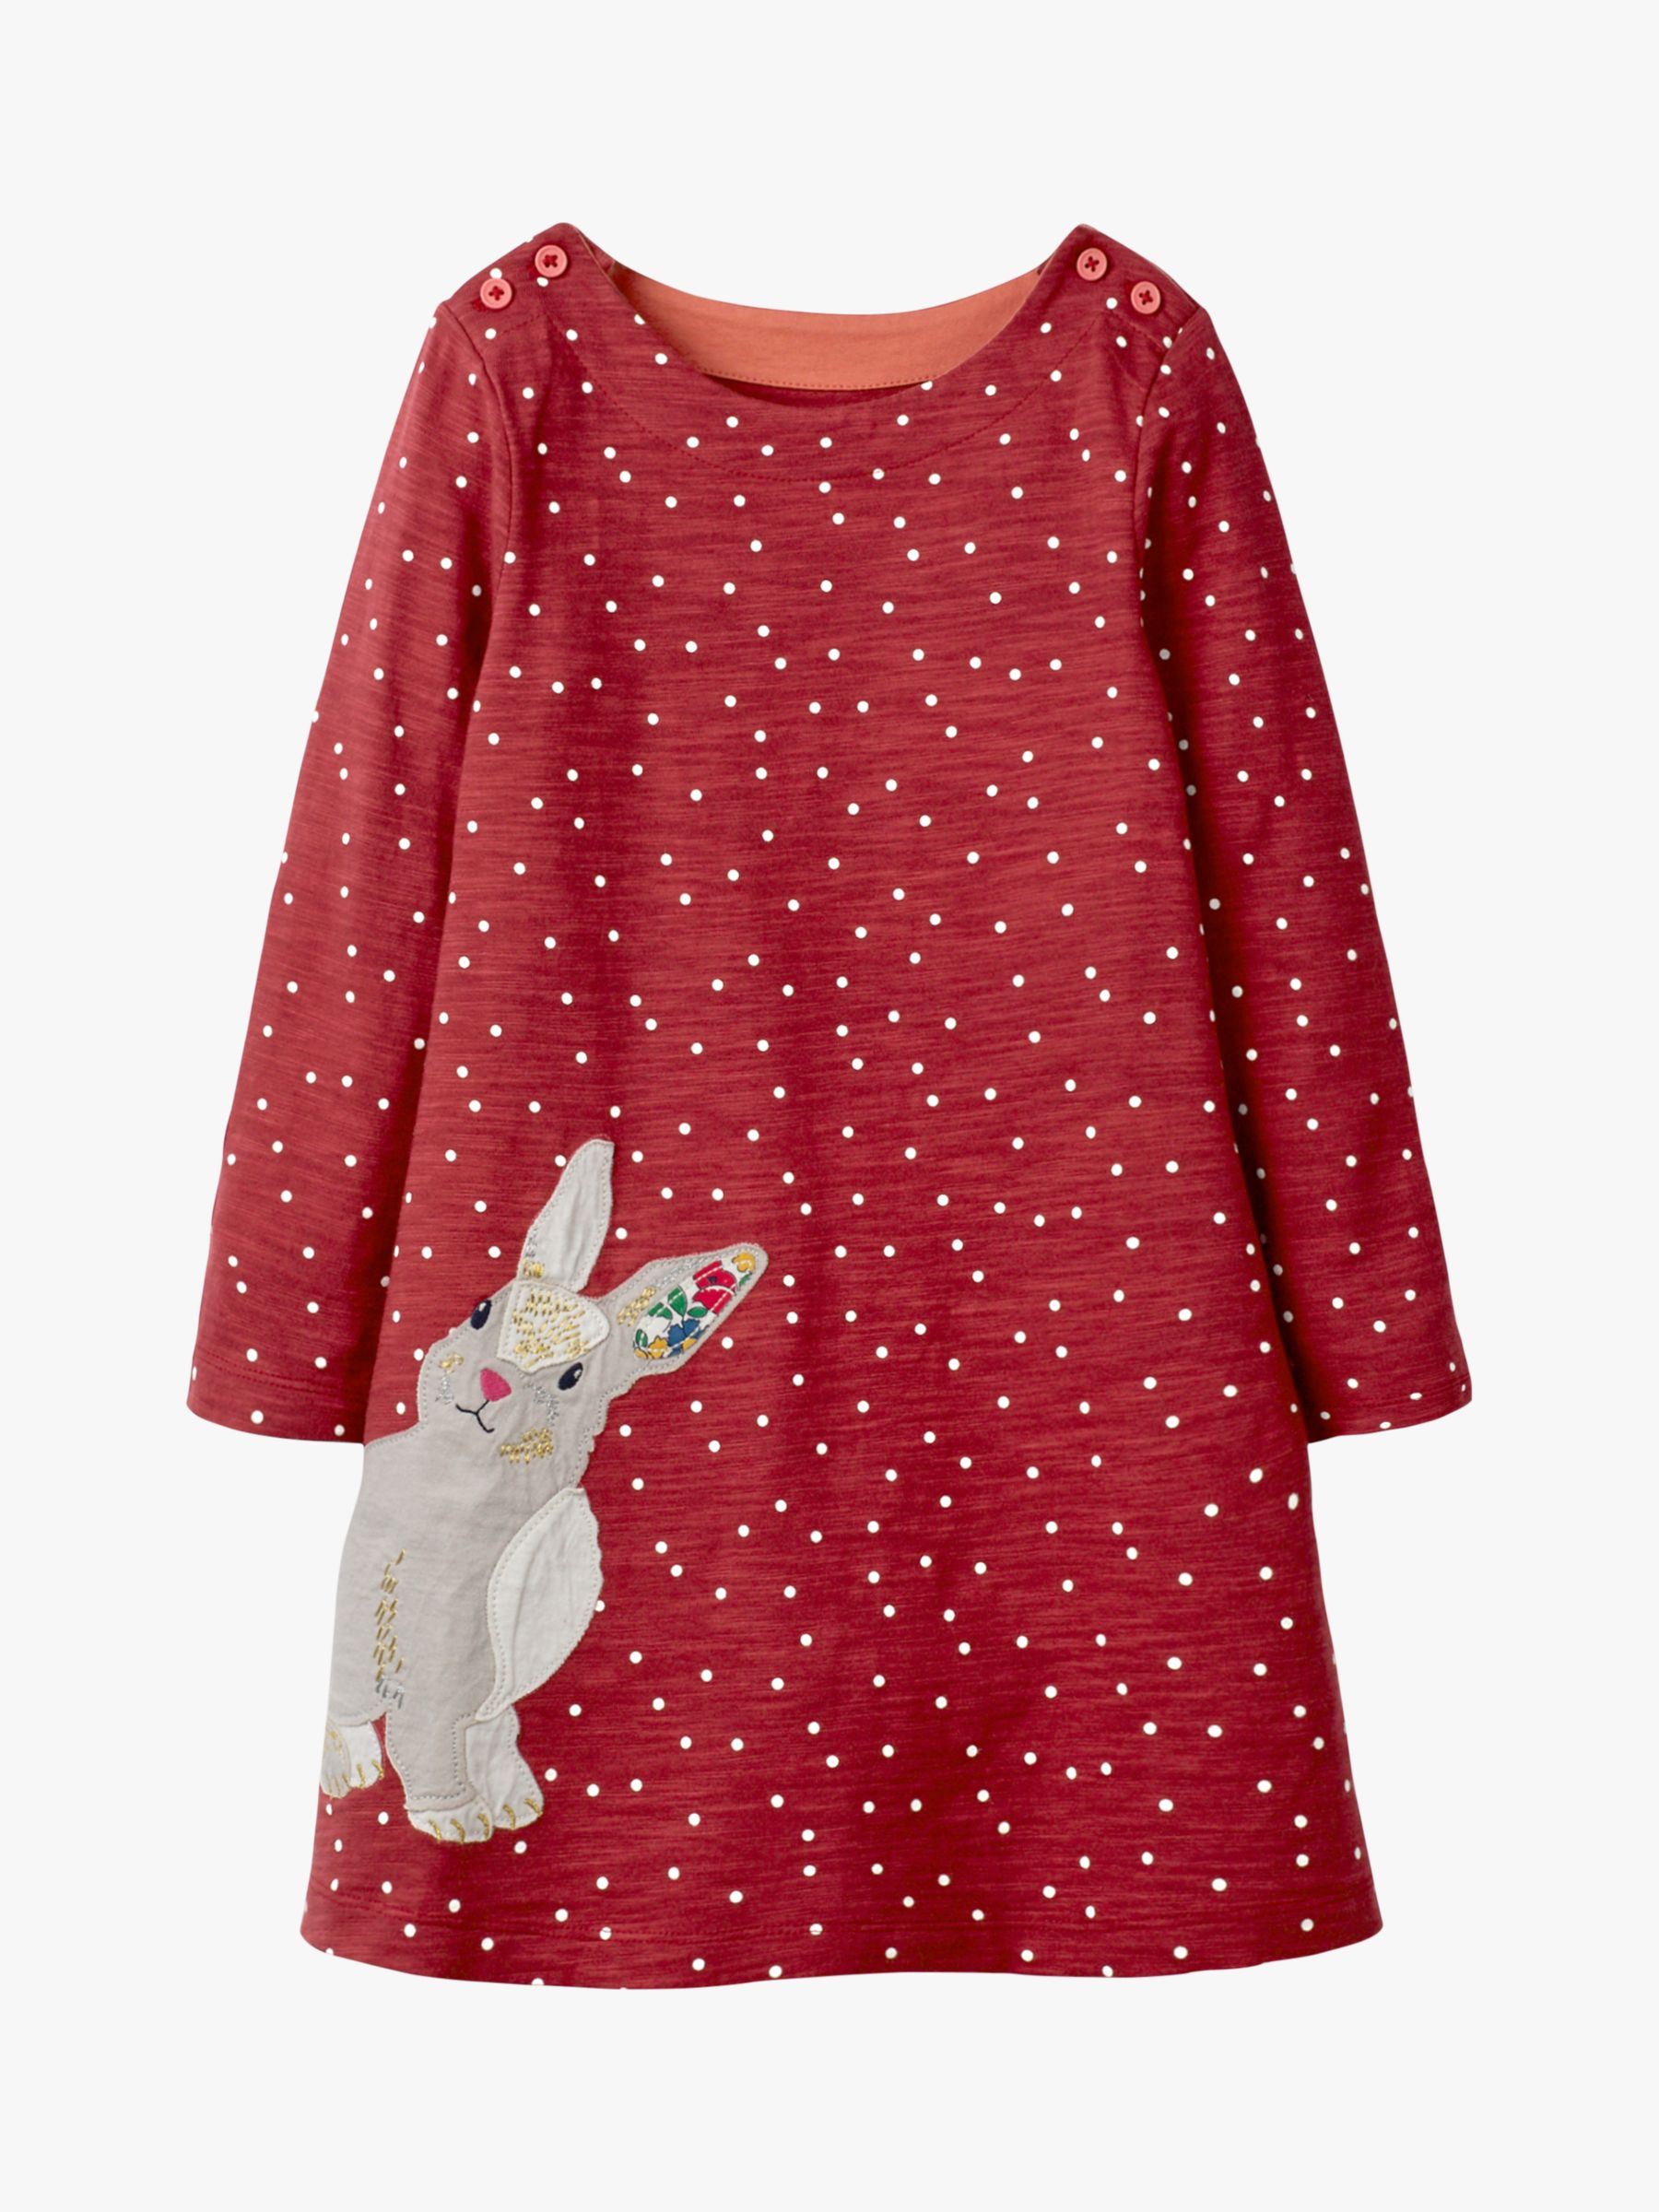 Pink Spotty Bunny Long Sleeved Girls Dress with Bunny Applique Details